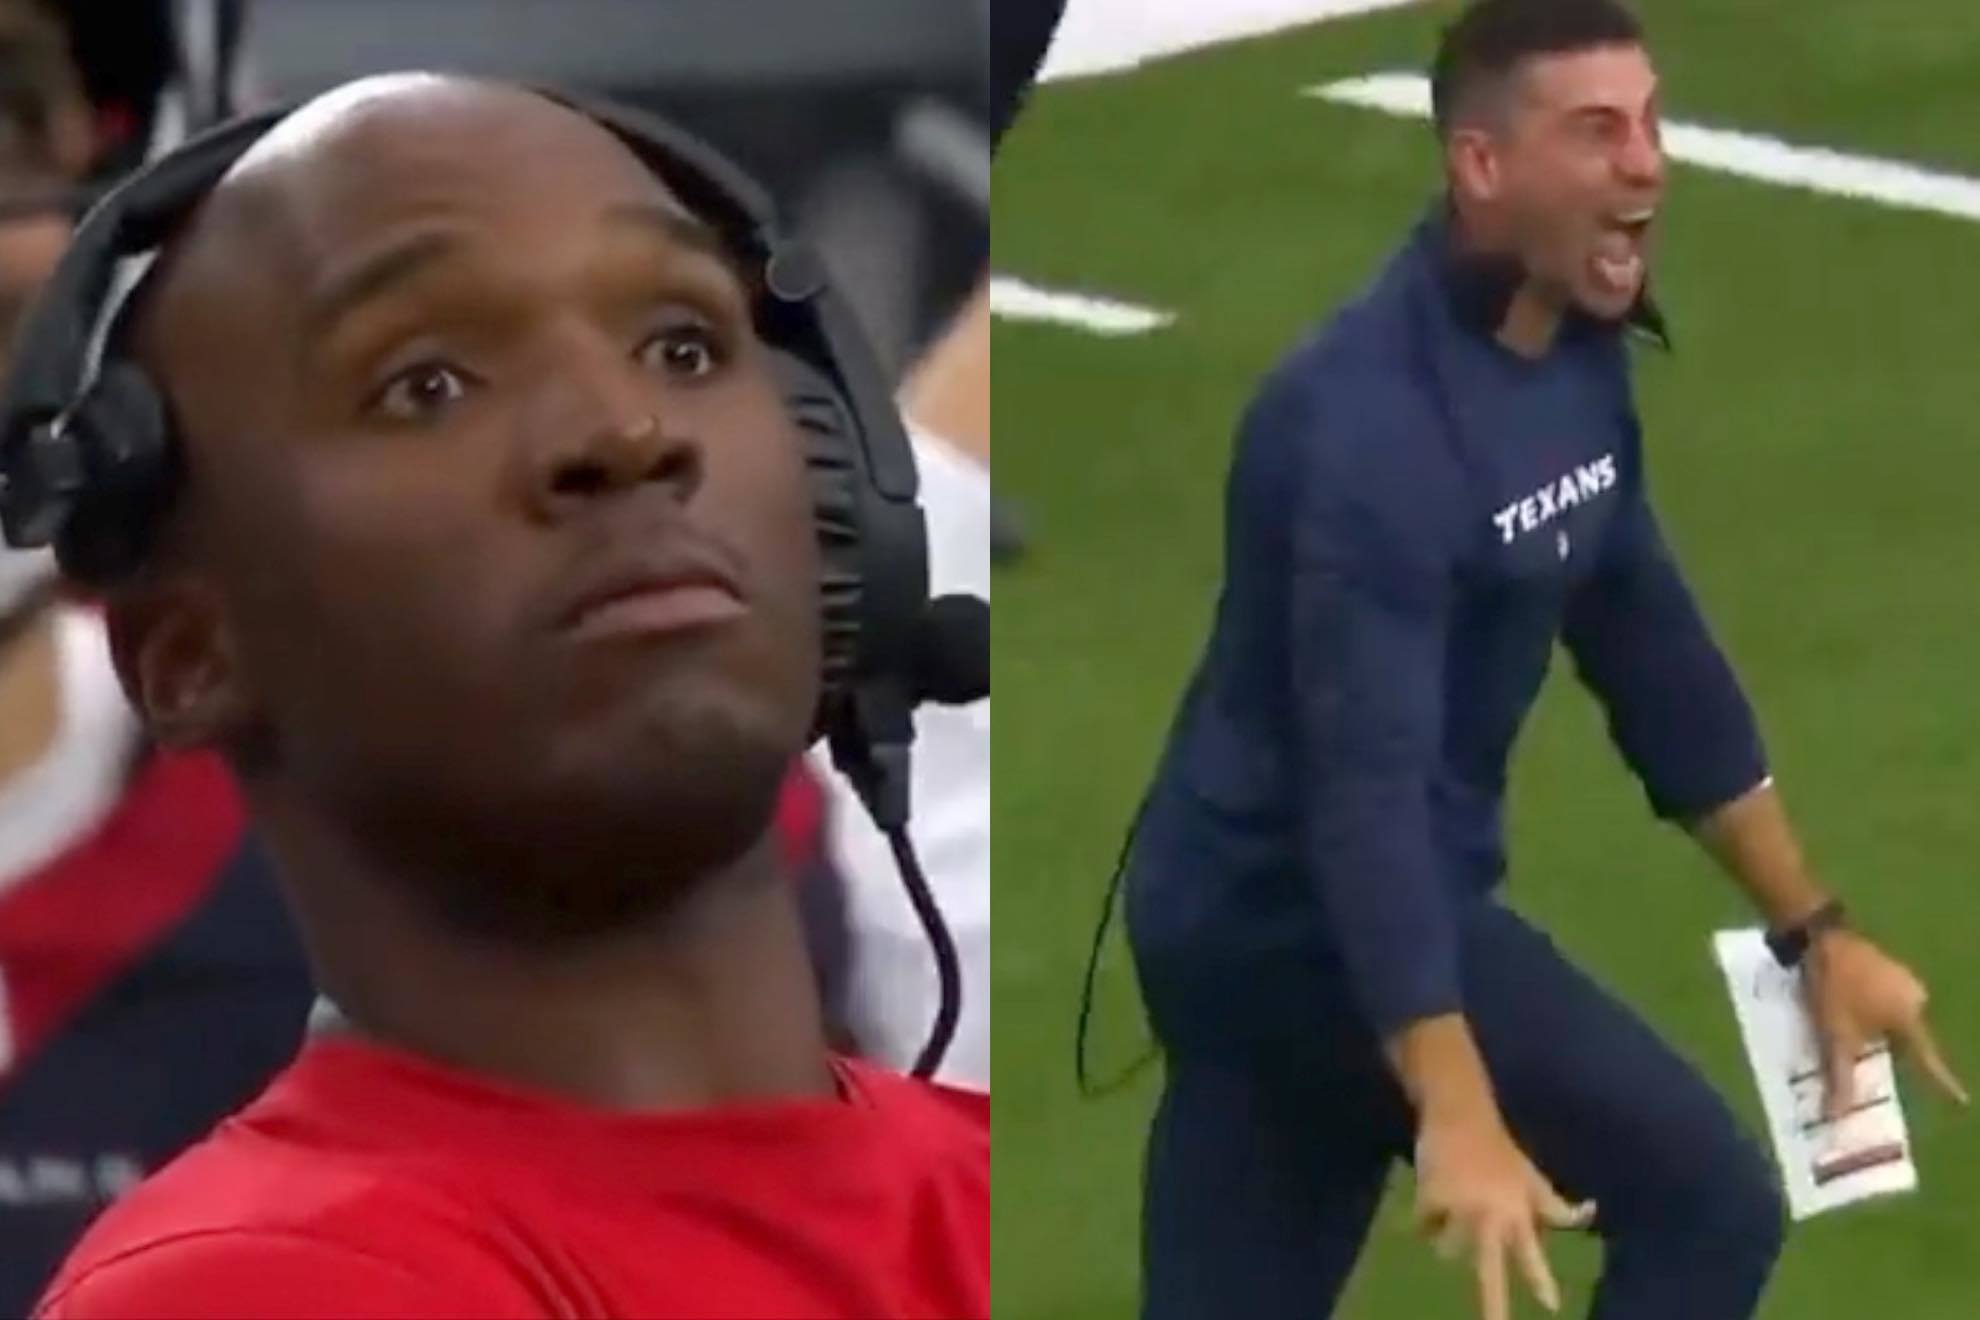 Texans running back replaces injured kicker, creates priceless reactions when he nails the go-ahead field goal